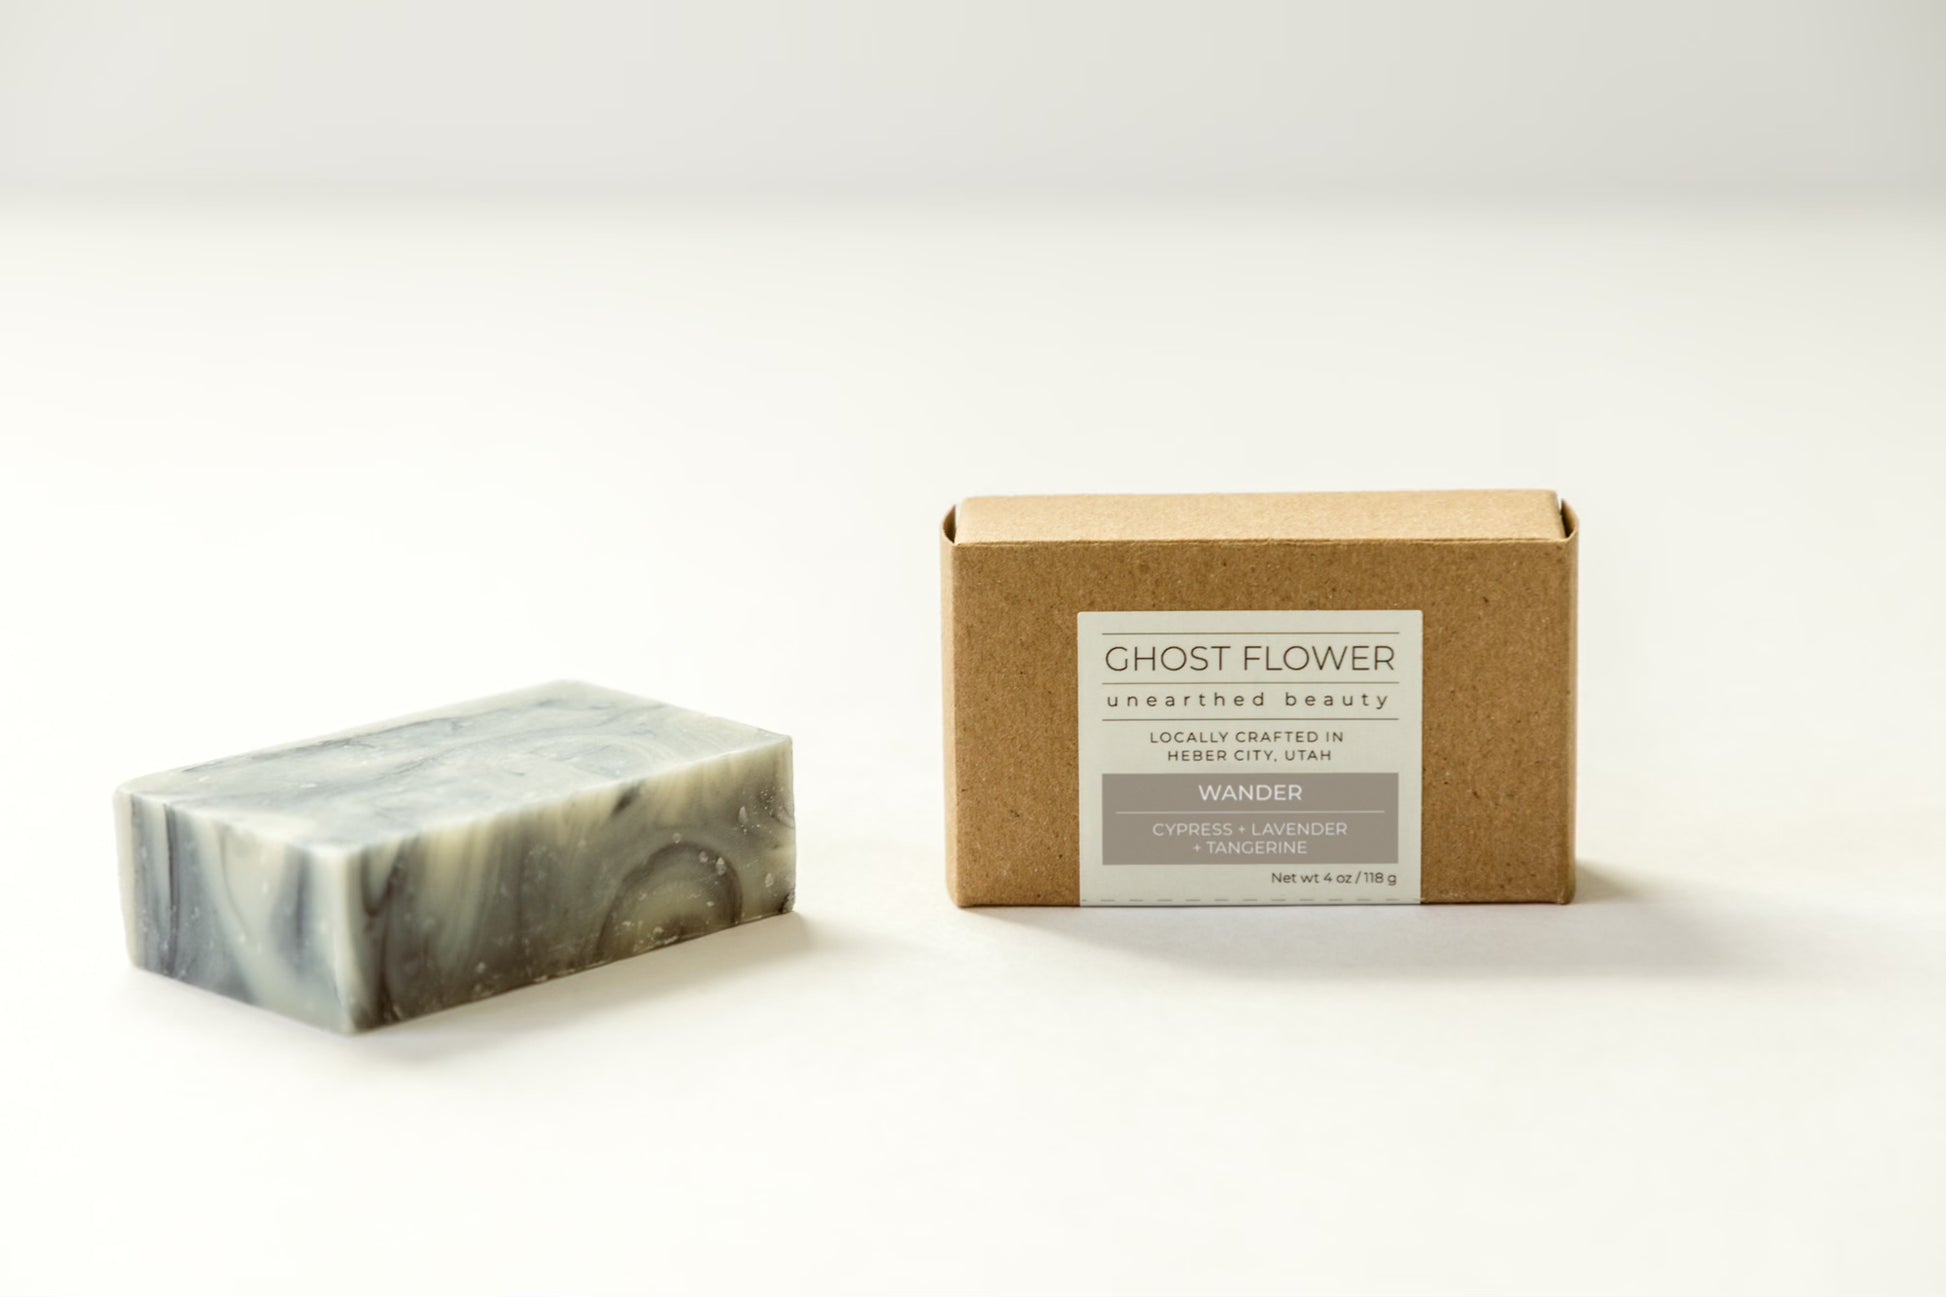 Soap-display-of-handmade-soap-called-wander- with-one-single-bar-next-to-it’s-box-ghost-flower-beauty.heic 